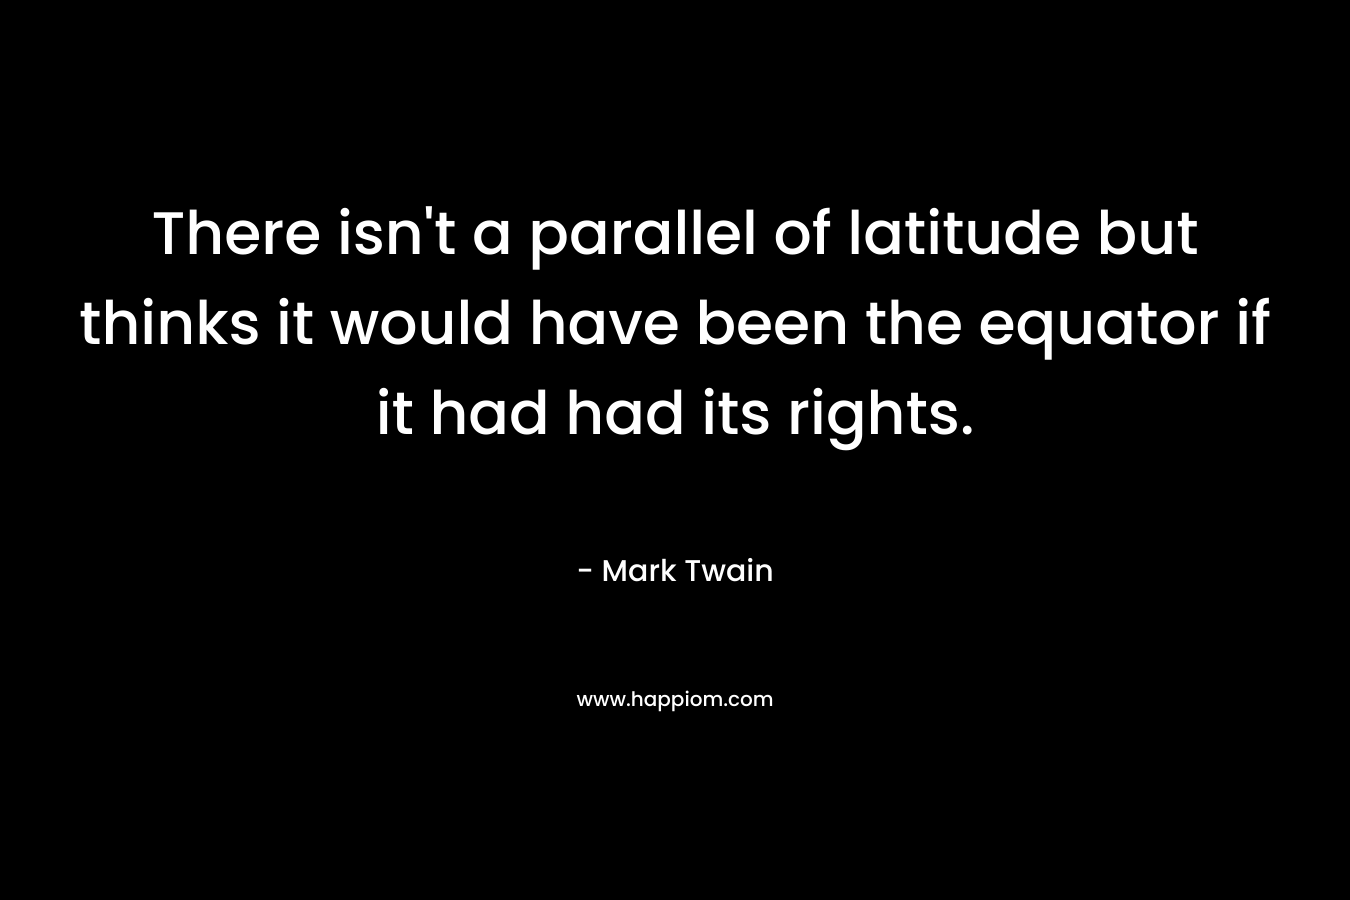 There isn't a parallel of latitude but thinks it would have been the equator if it had had its rights.